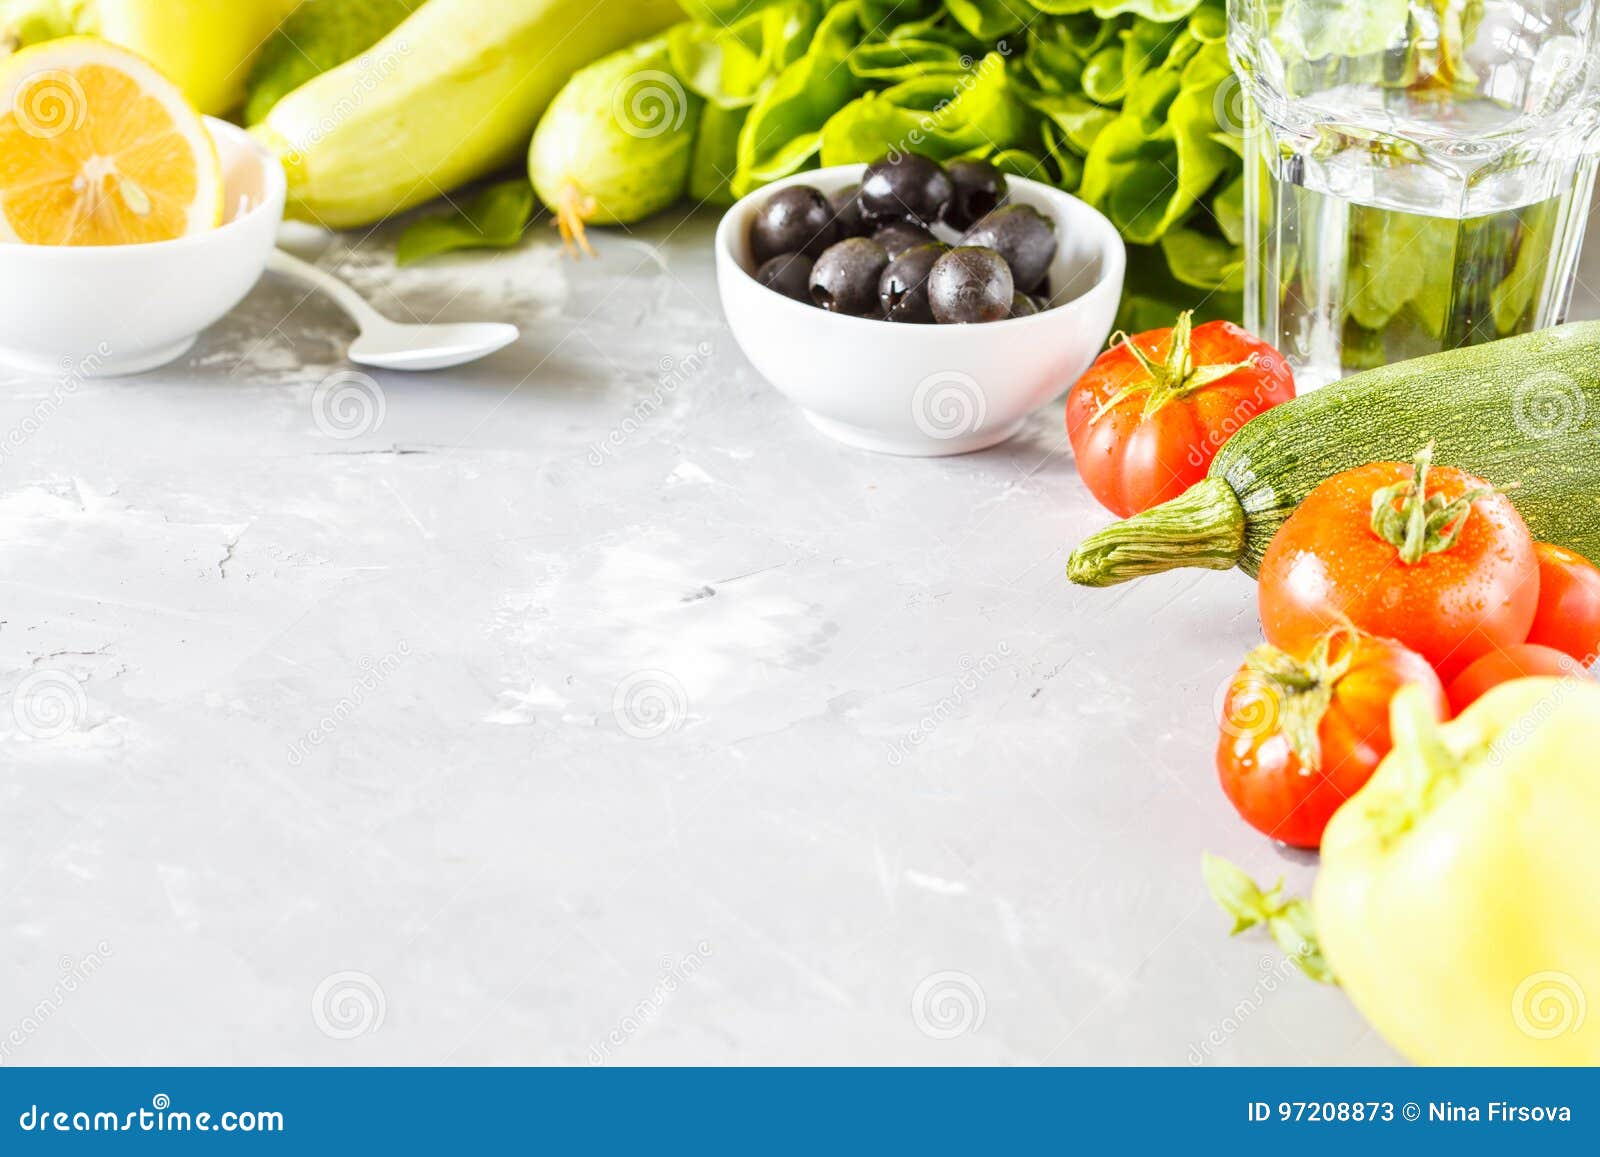 Ingredients for a Bright Summer Salad. Stock Image - Image of healthy ...